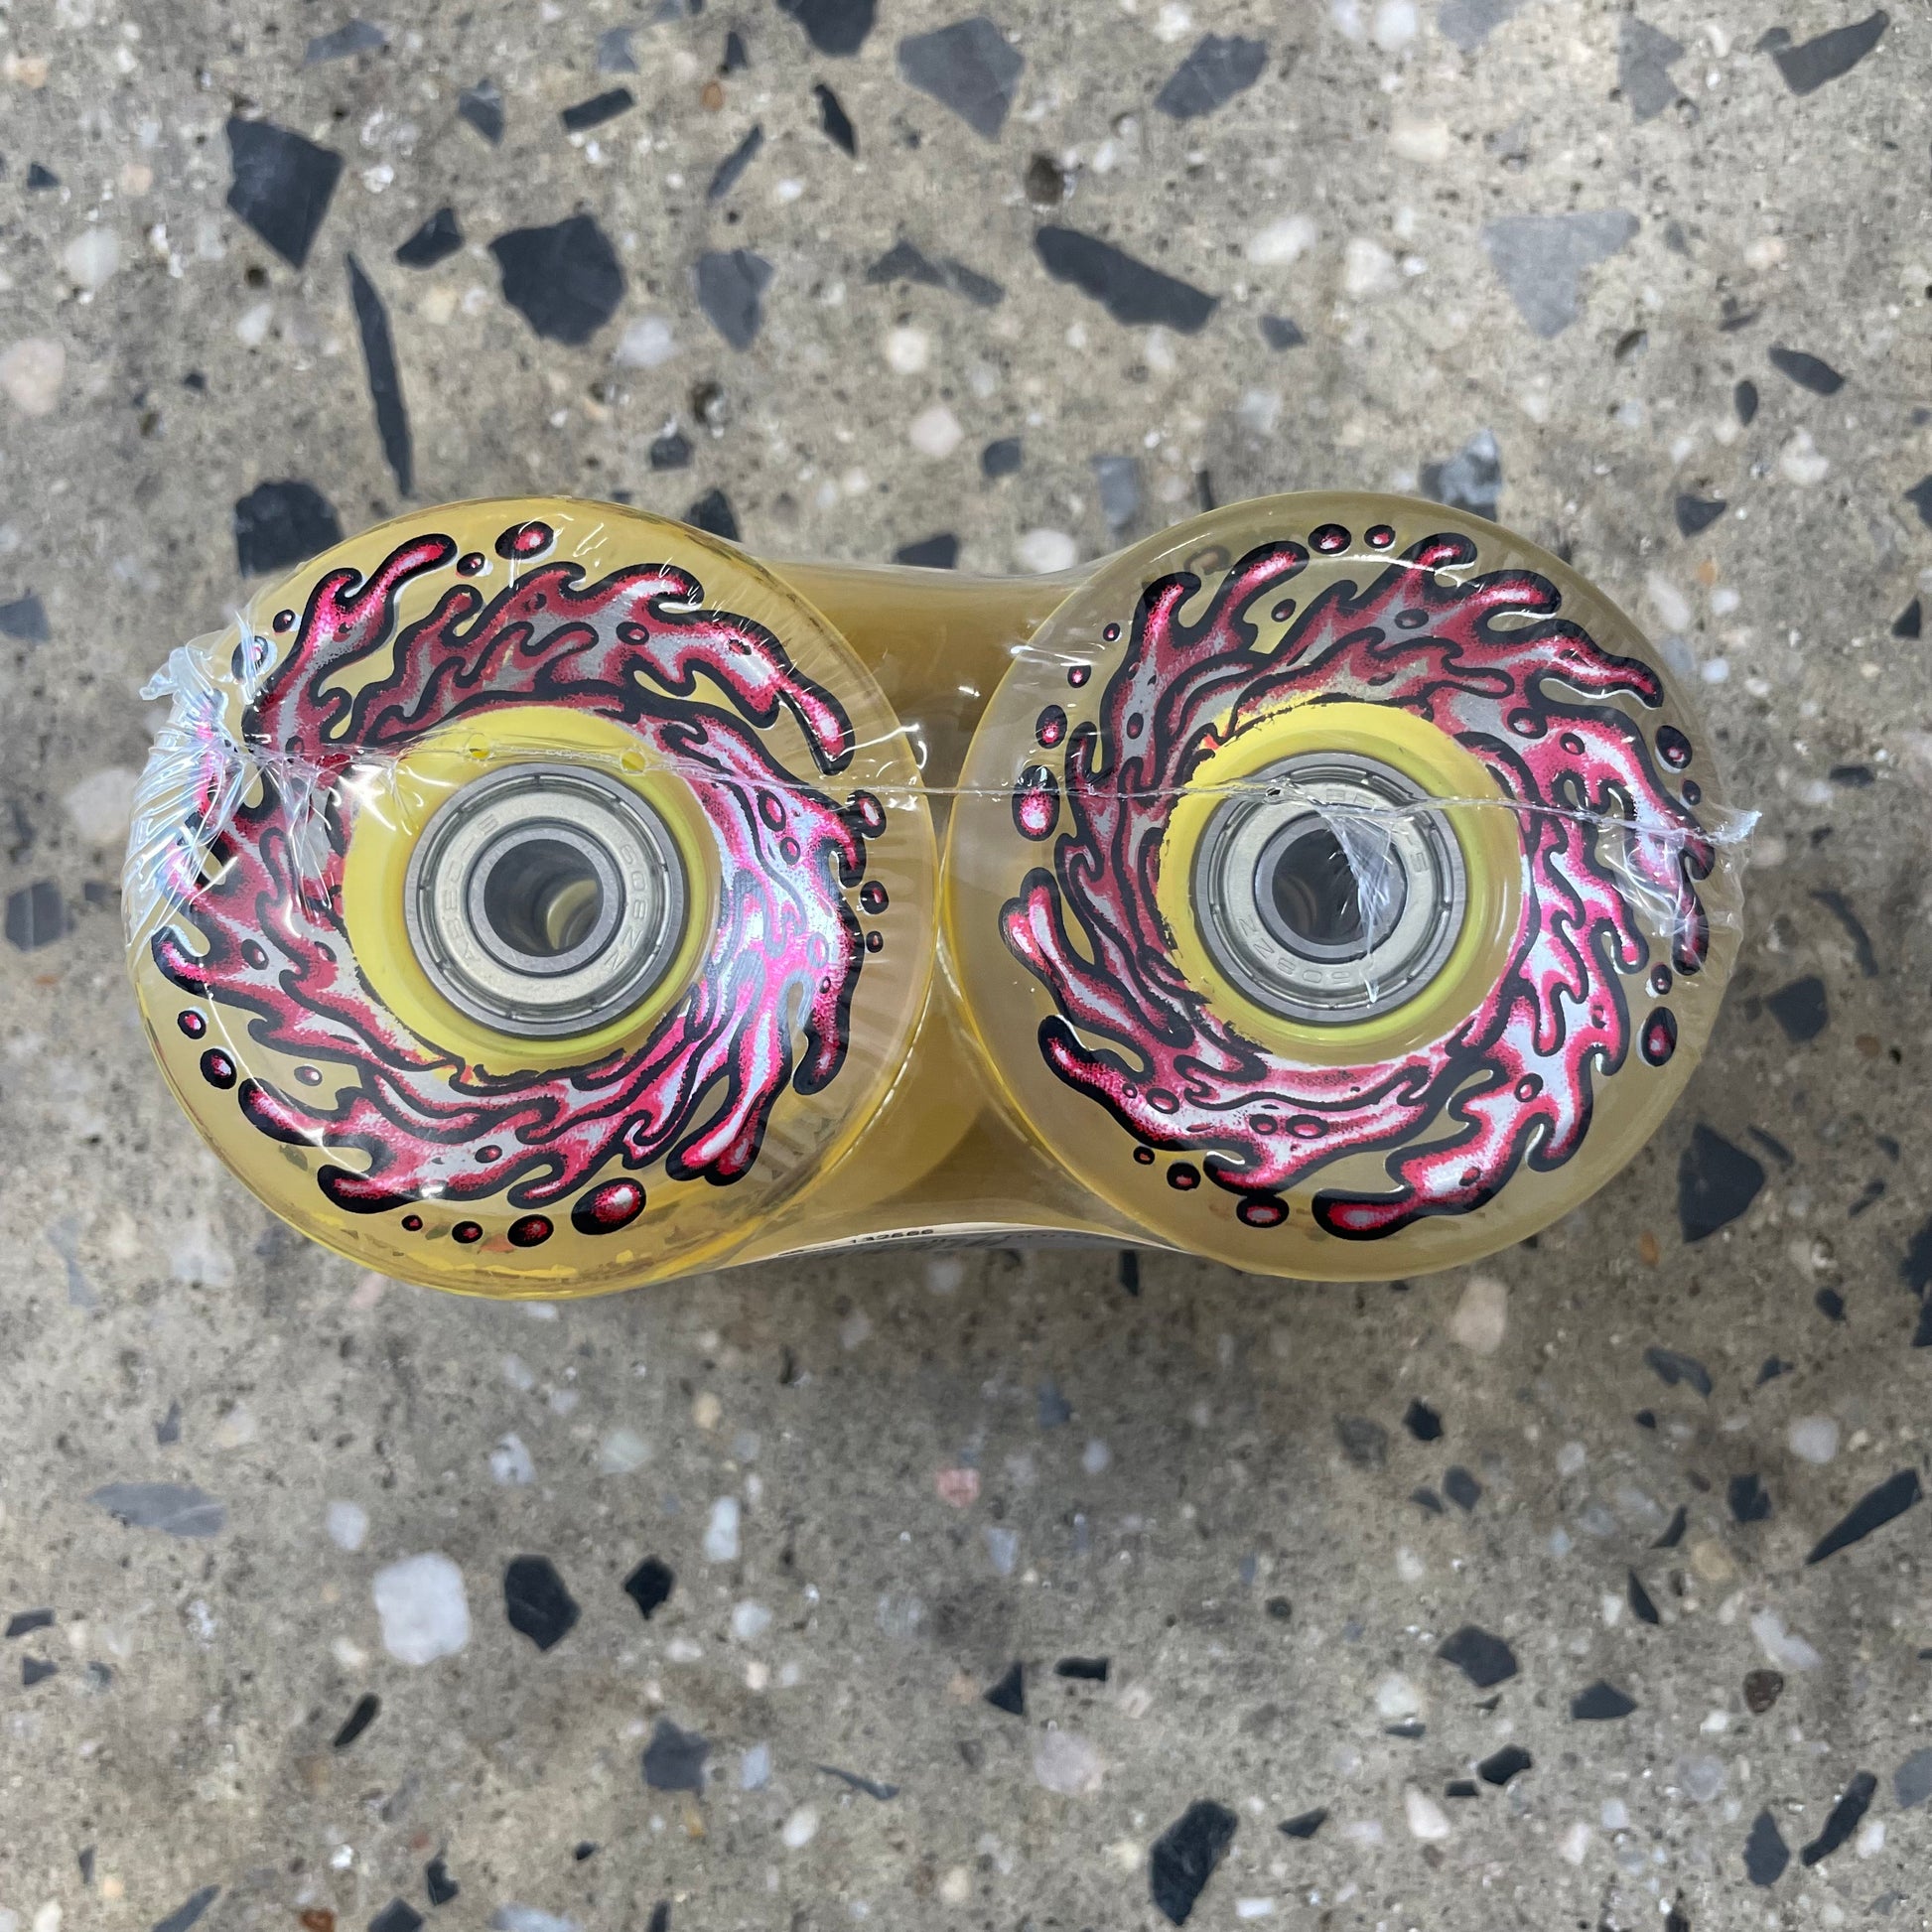 yellow wheels with pink, white, black design